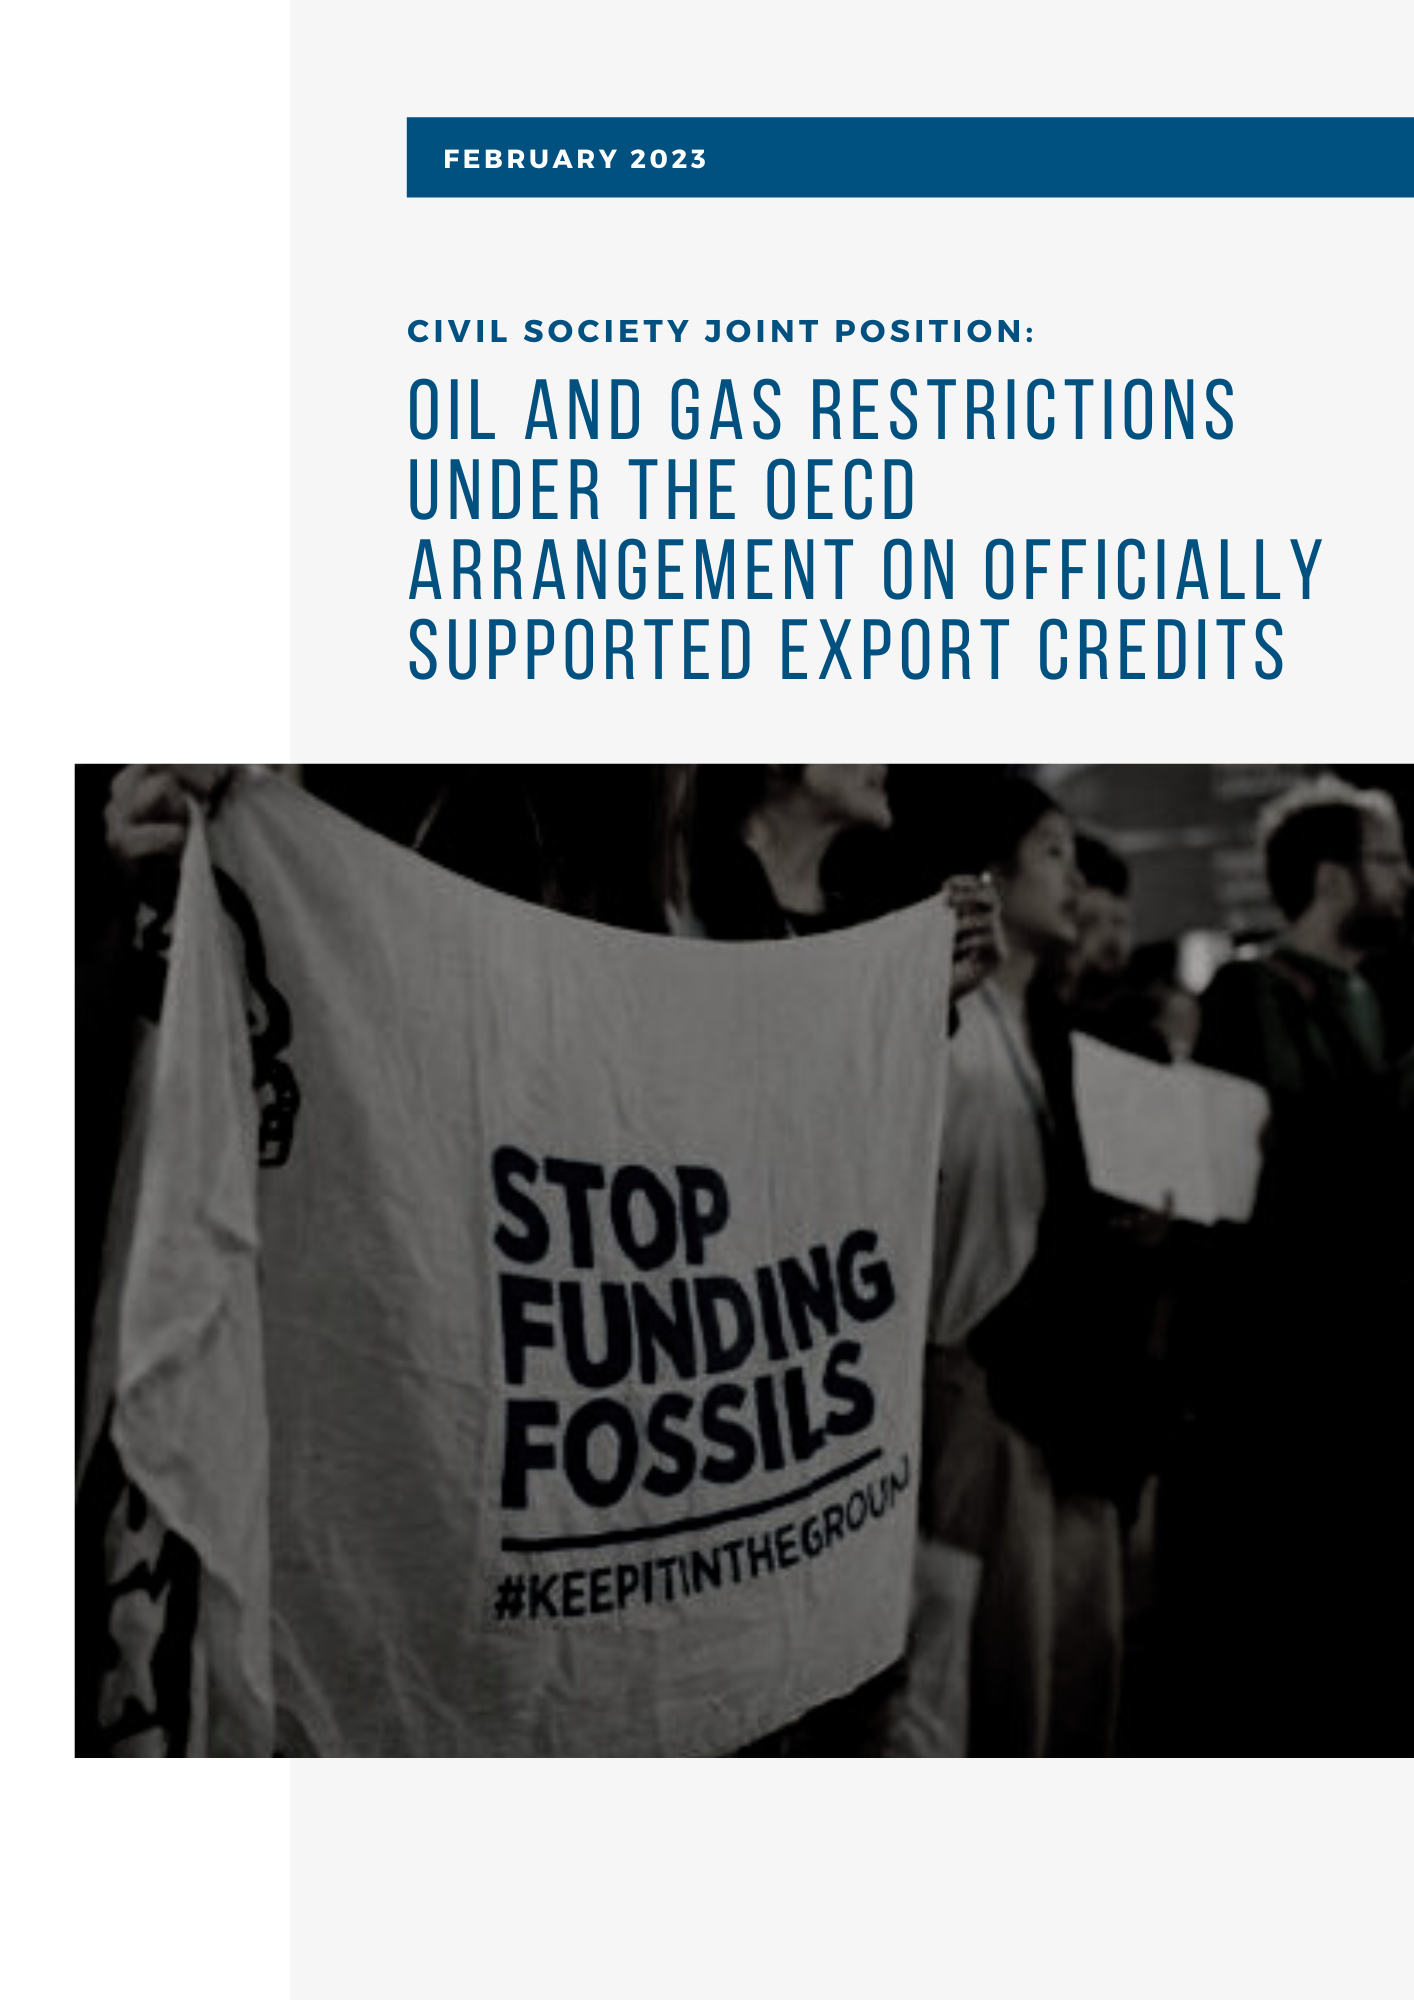 Civil Society Joint Position: Oil and Gas Restrictions under the OECD Arrangement on Officially Supported Export Credits